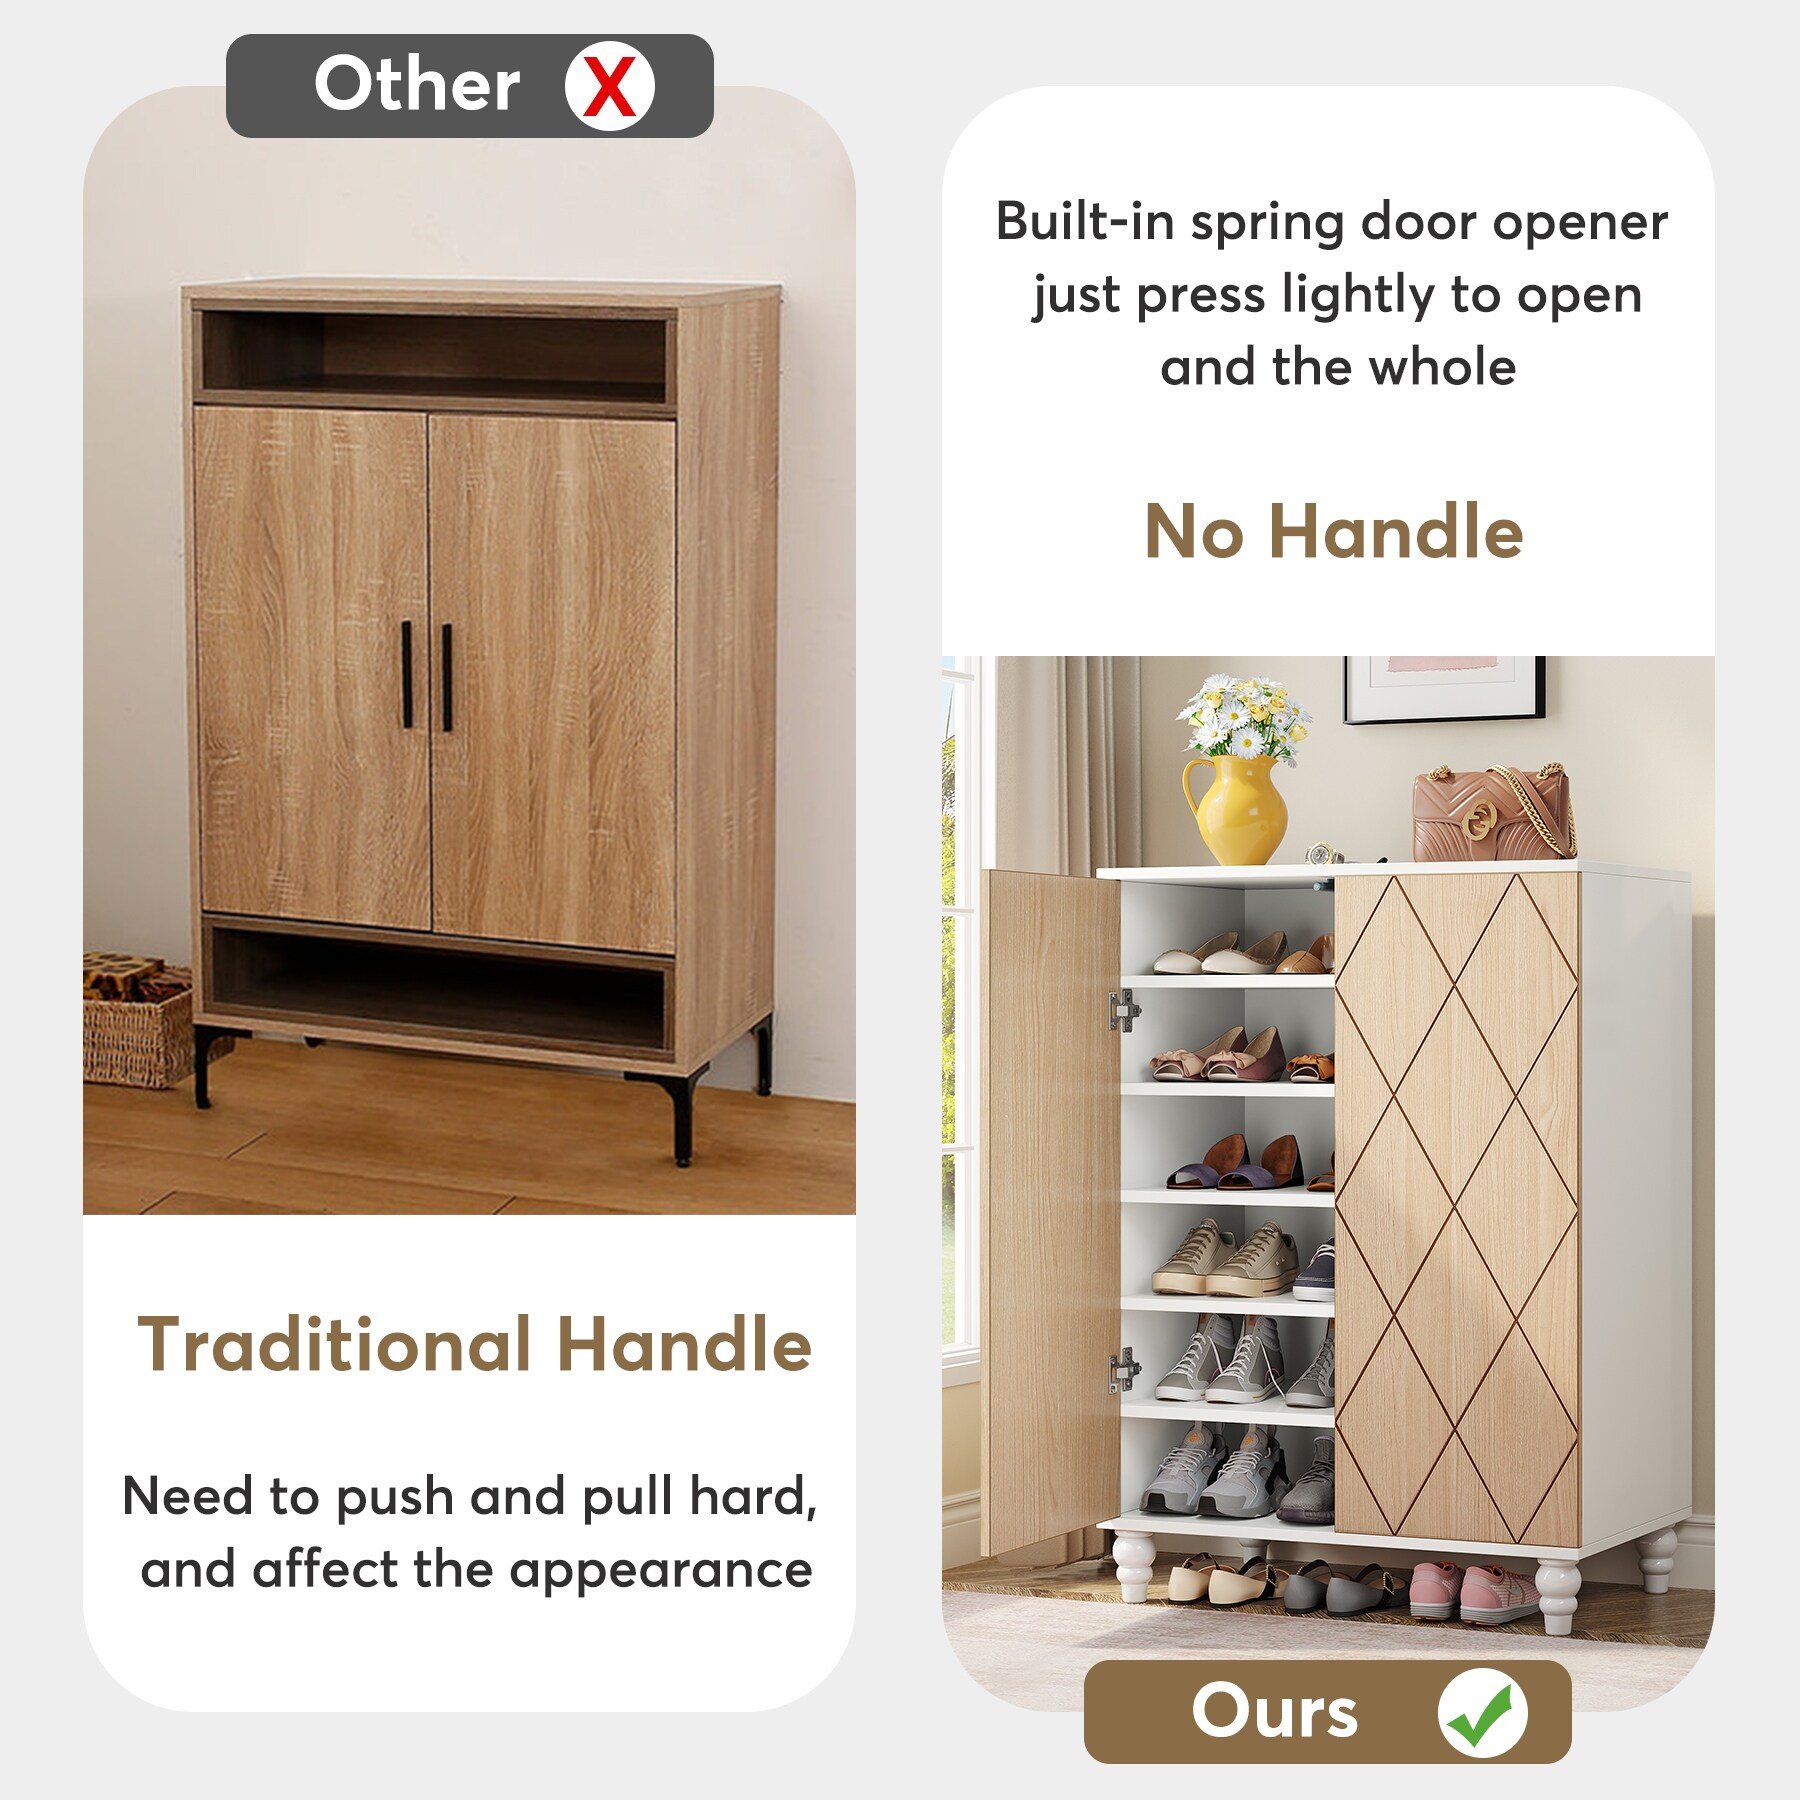 https://ak1.ostkcdn.com/images/products/is/images/direct/c9485caa04e5dcfec9ac4b5a675b9f3475c9bd13/Shoe-Storage-Cabinet-with-Doors%2C-Wooden-Shoes-Organizer-Cabinets-with-Adjustable-Shelves.jpg